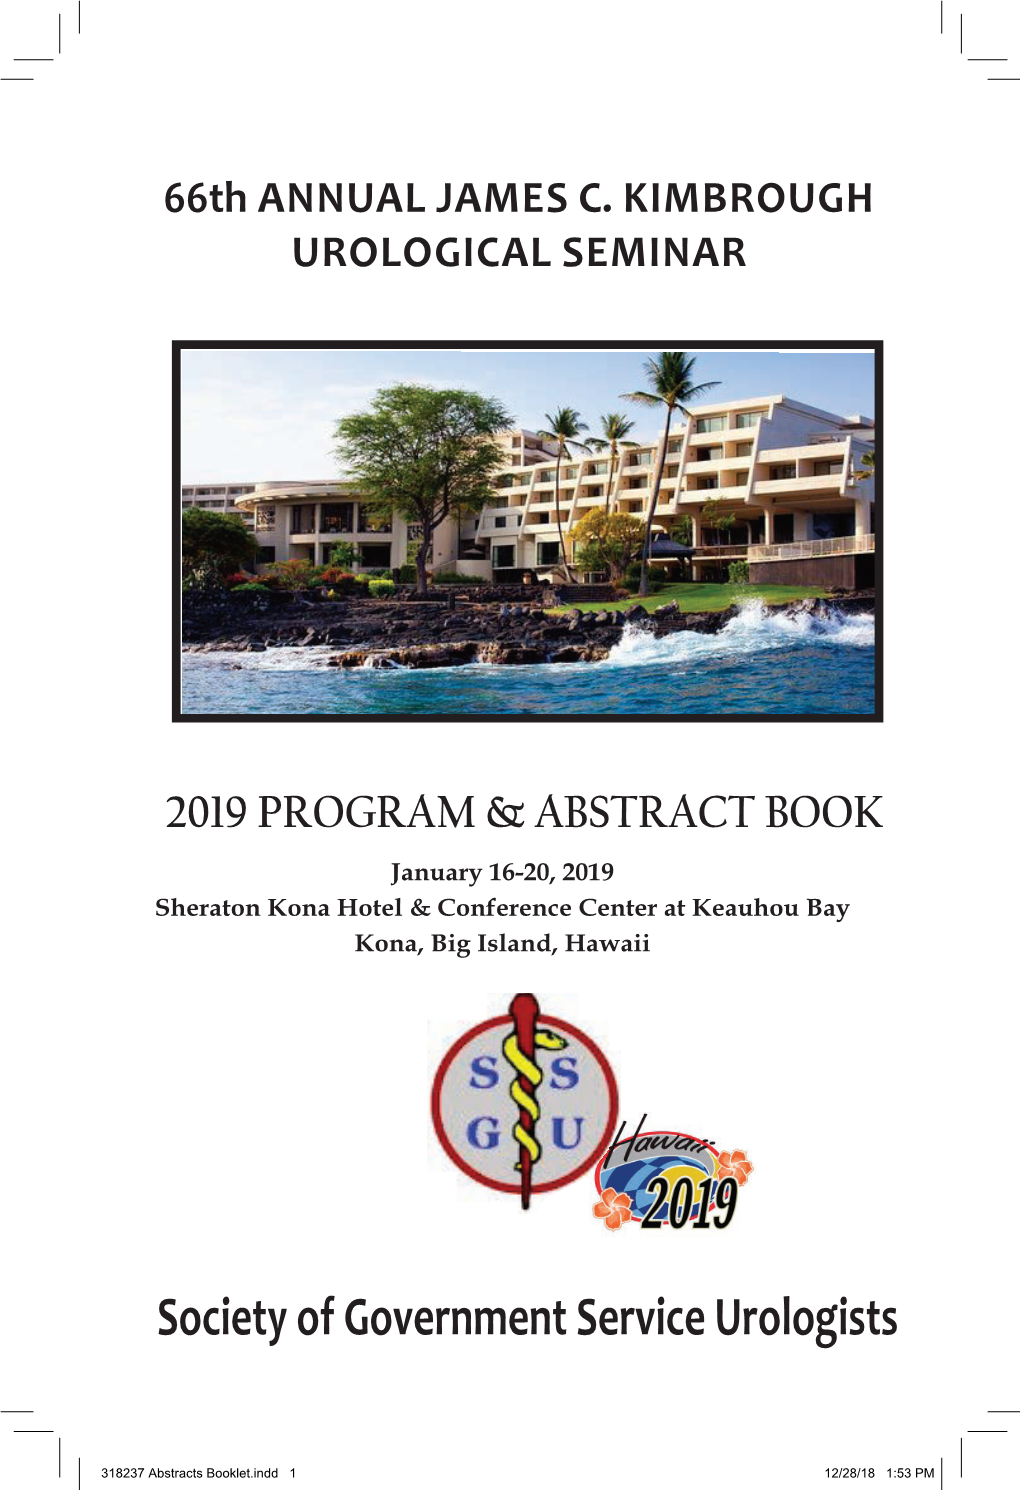 2019 Program & Abstracts